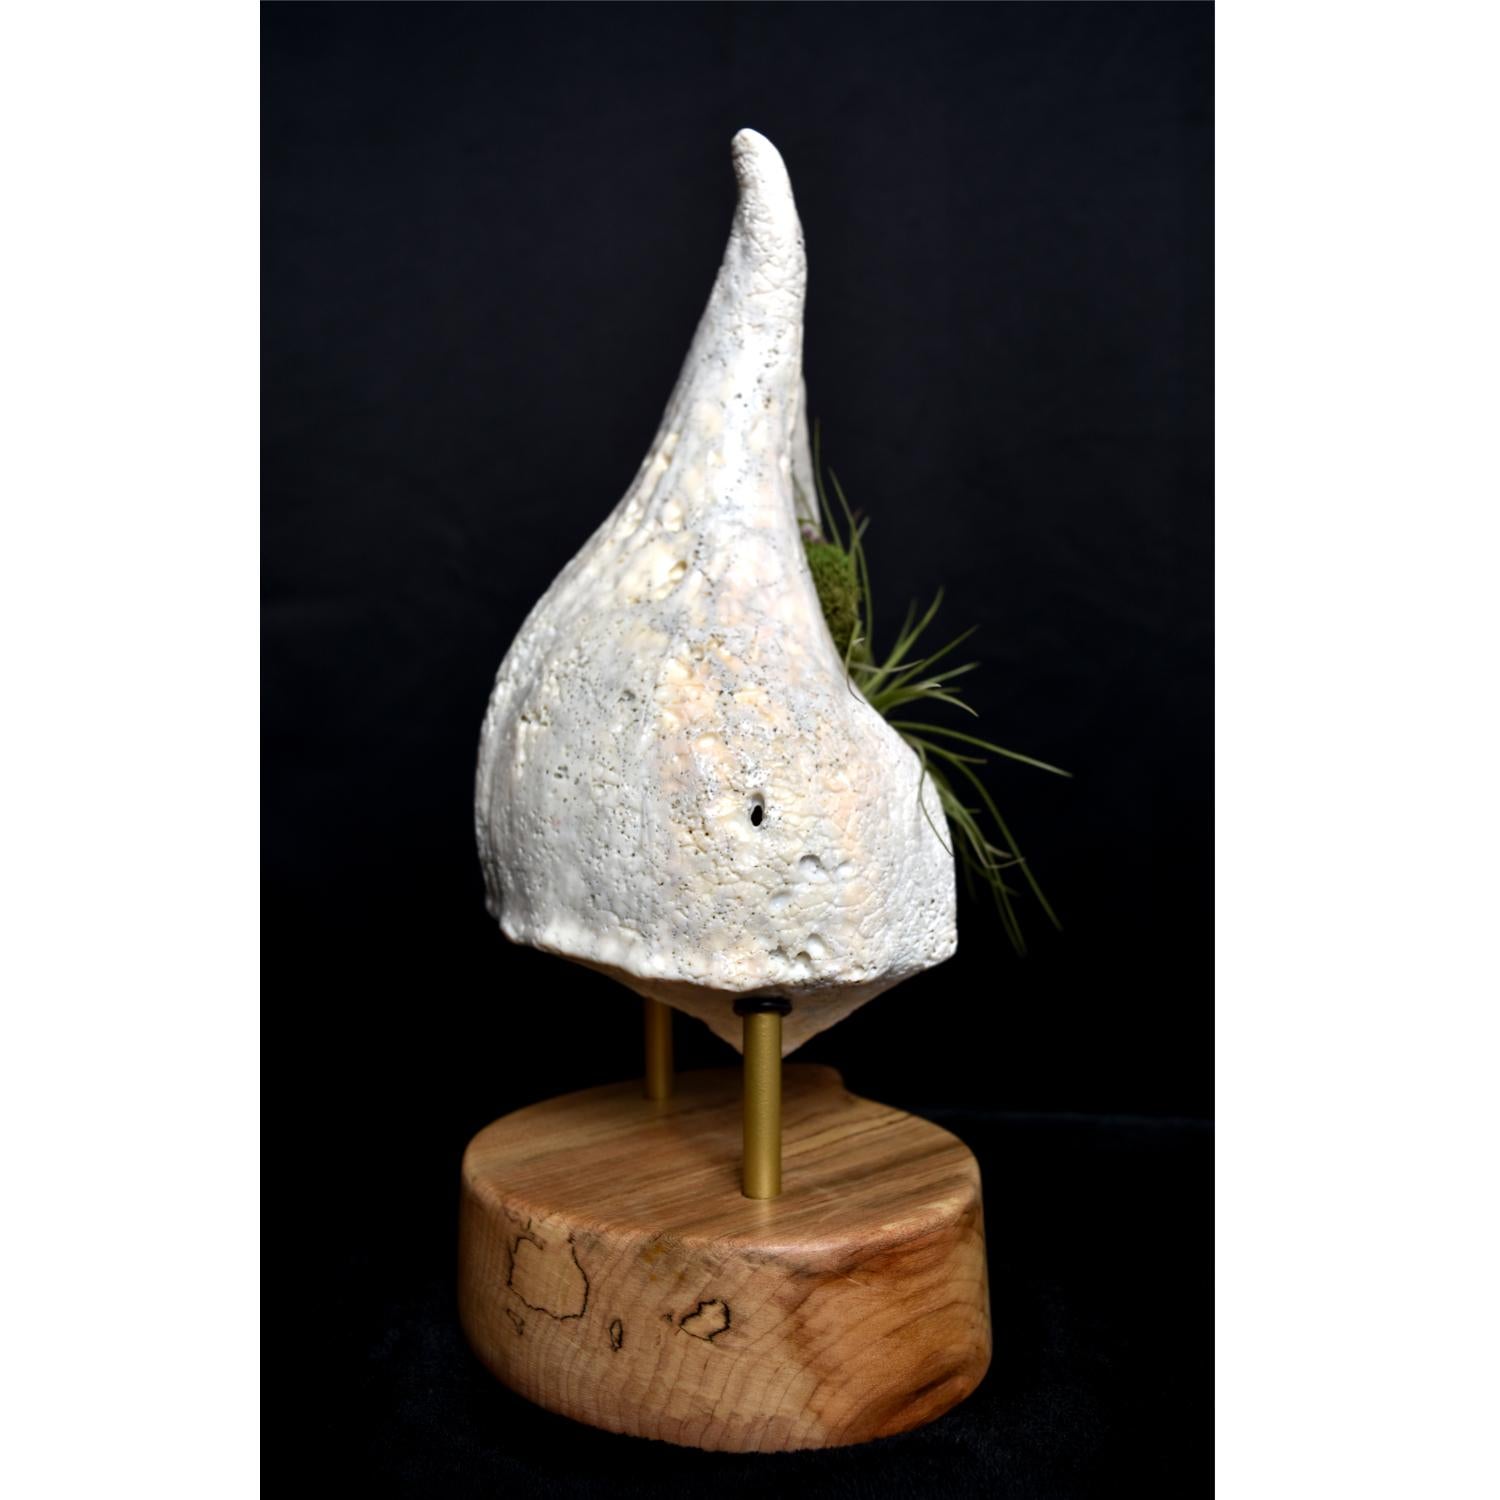 American Giant Whelk Conch Sea Shell Living Sculpture & Air Plant on Spalted Maple Base